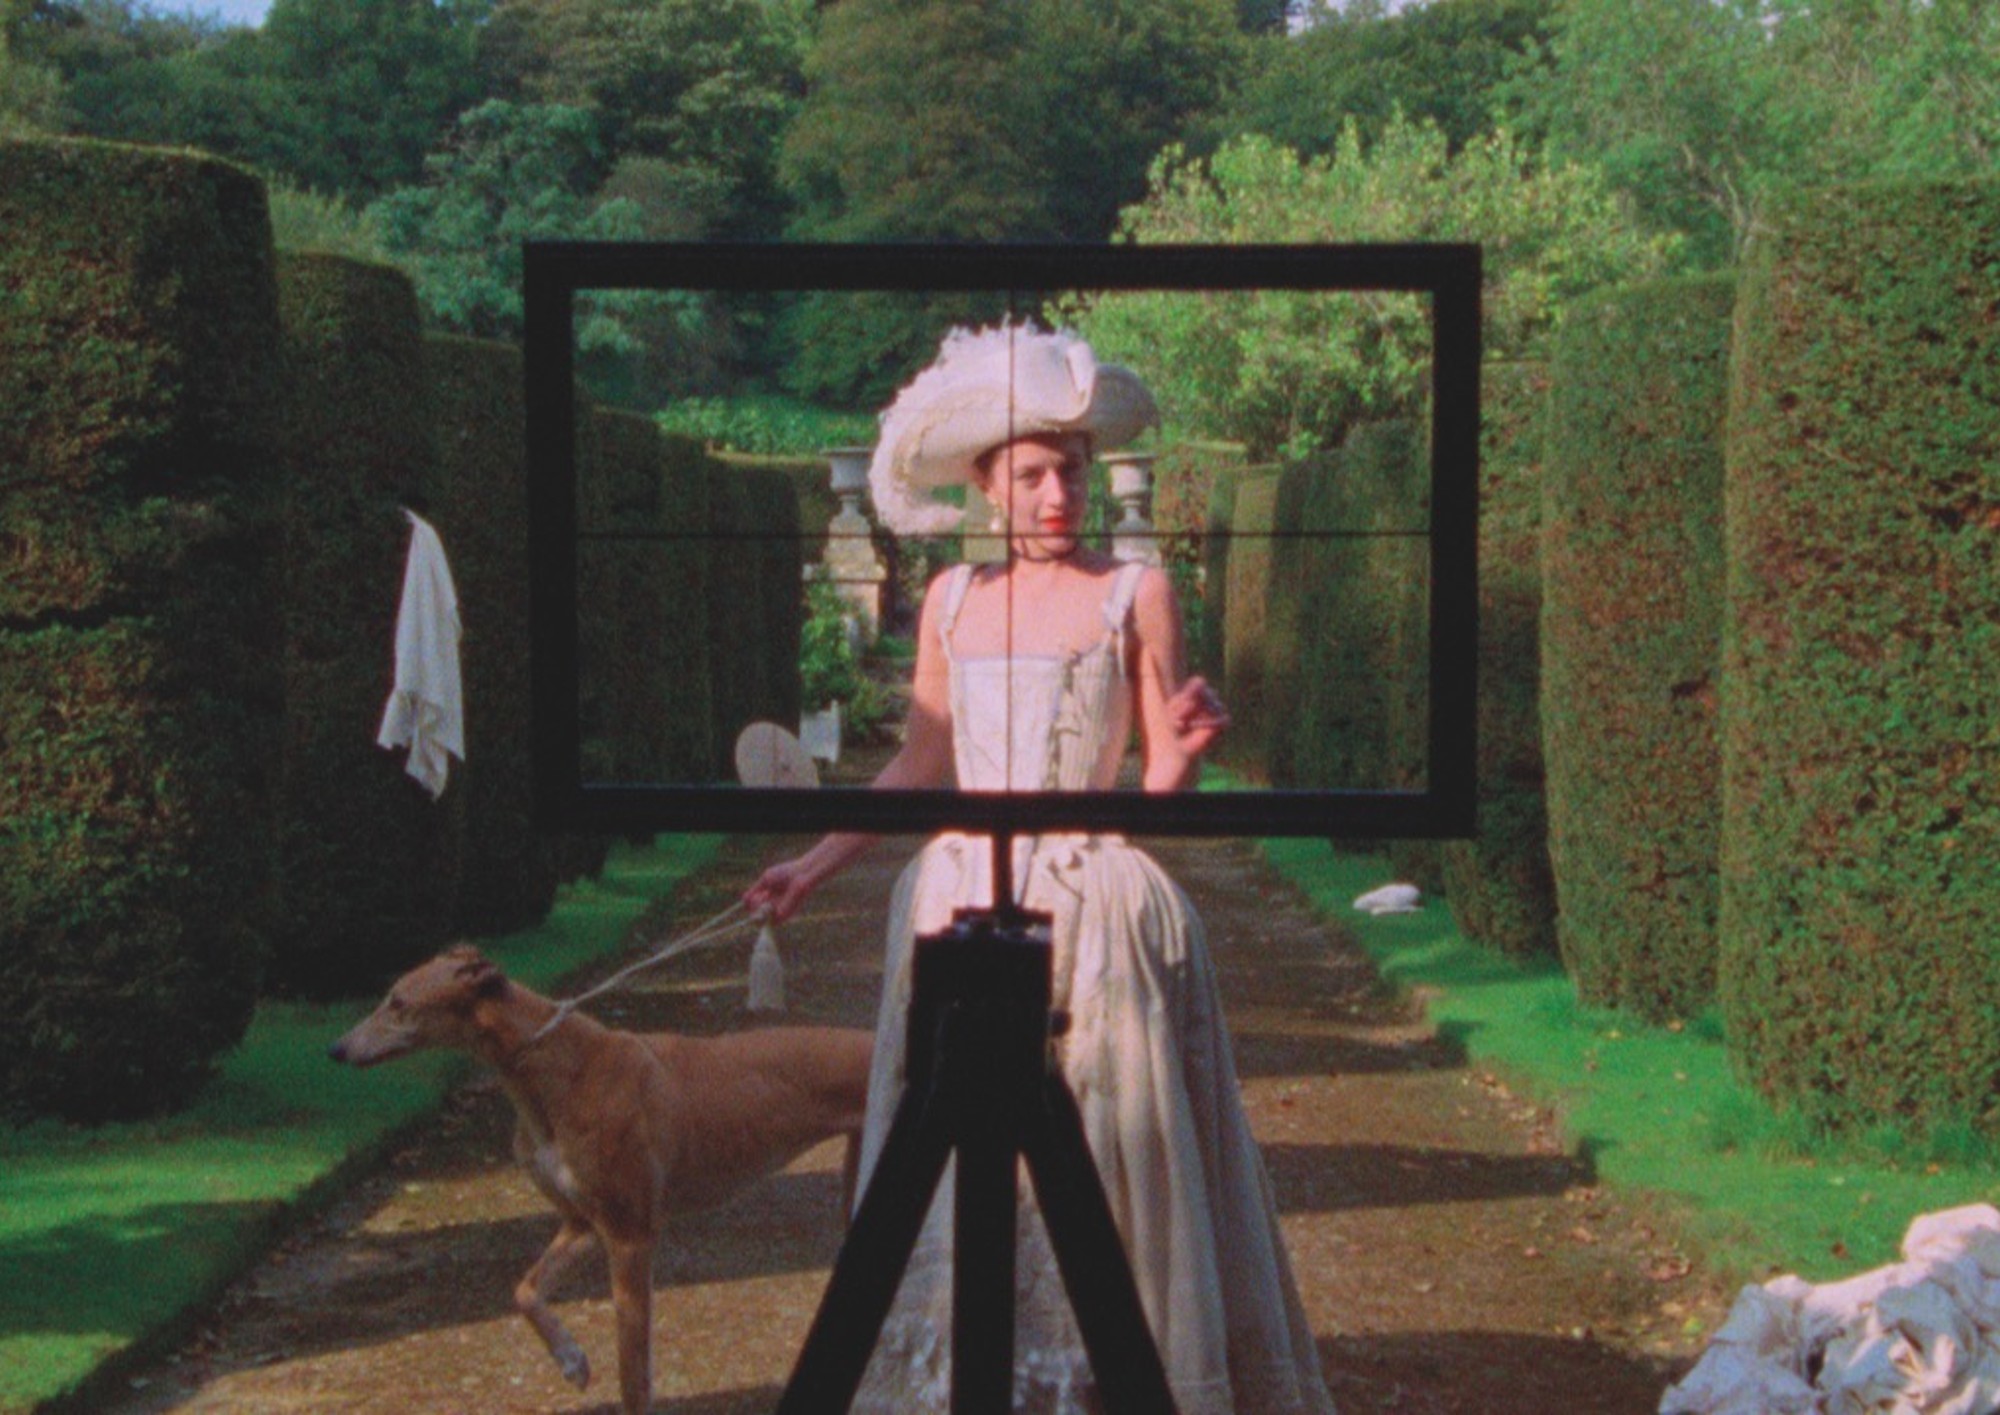 Image from the motion picture The Draughtsman's Contract